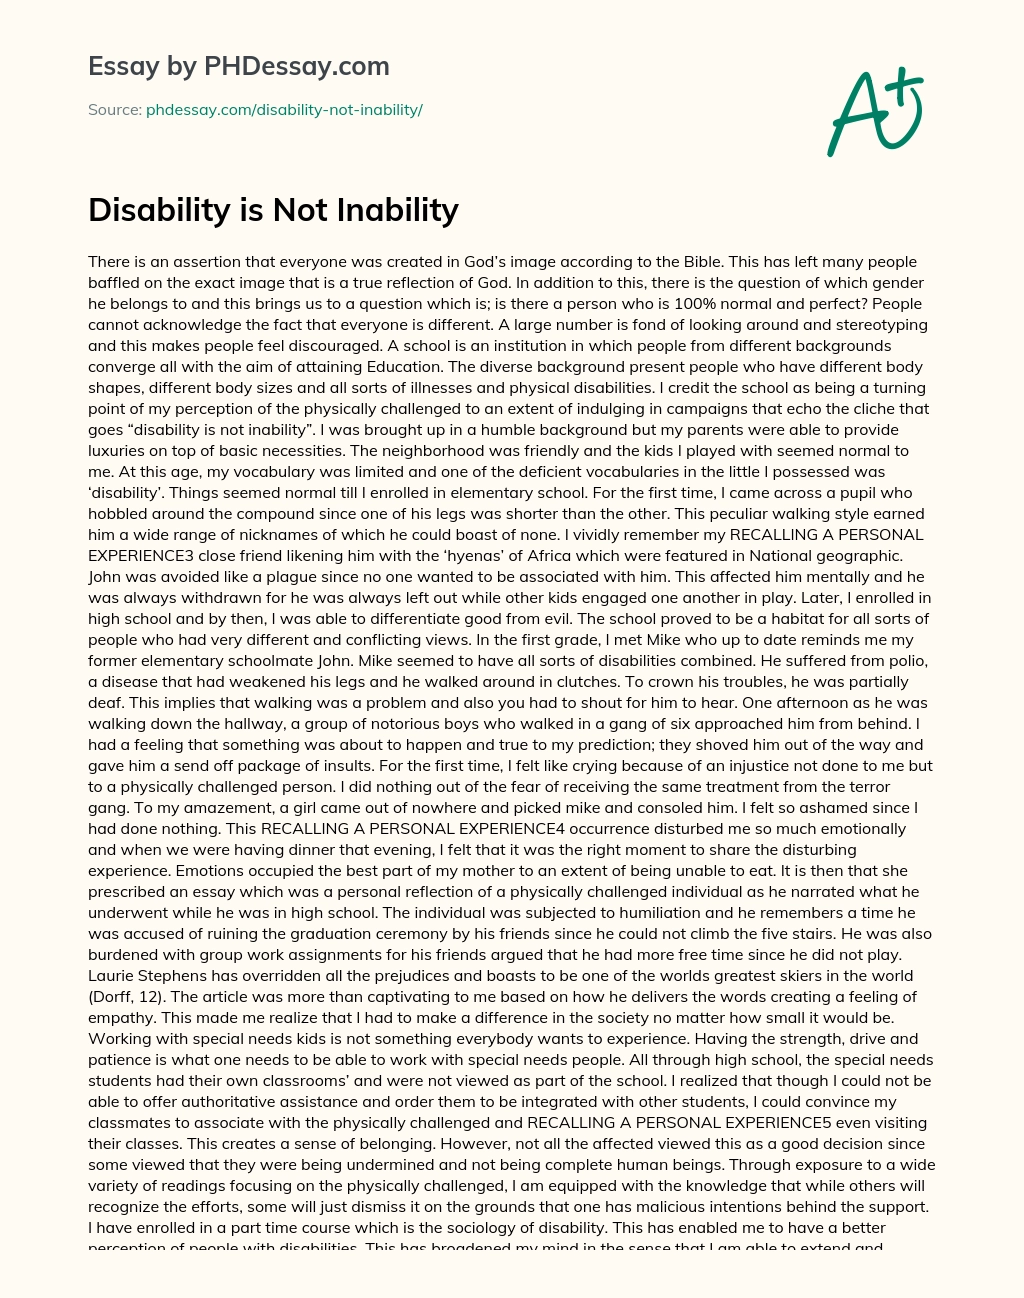 Disability is Not Inability essay